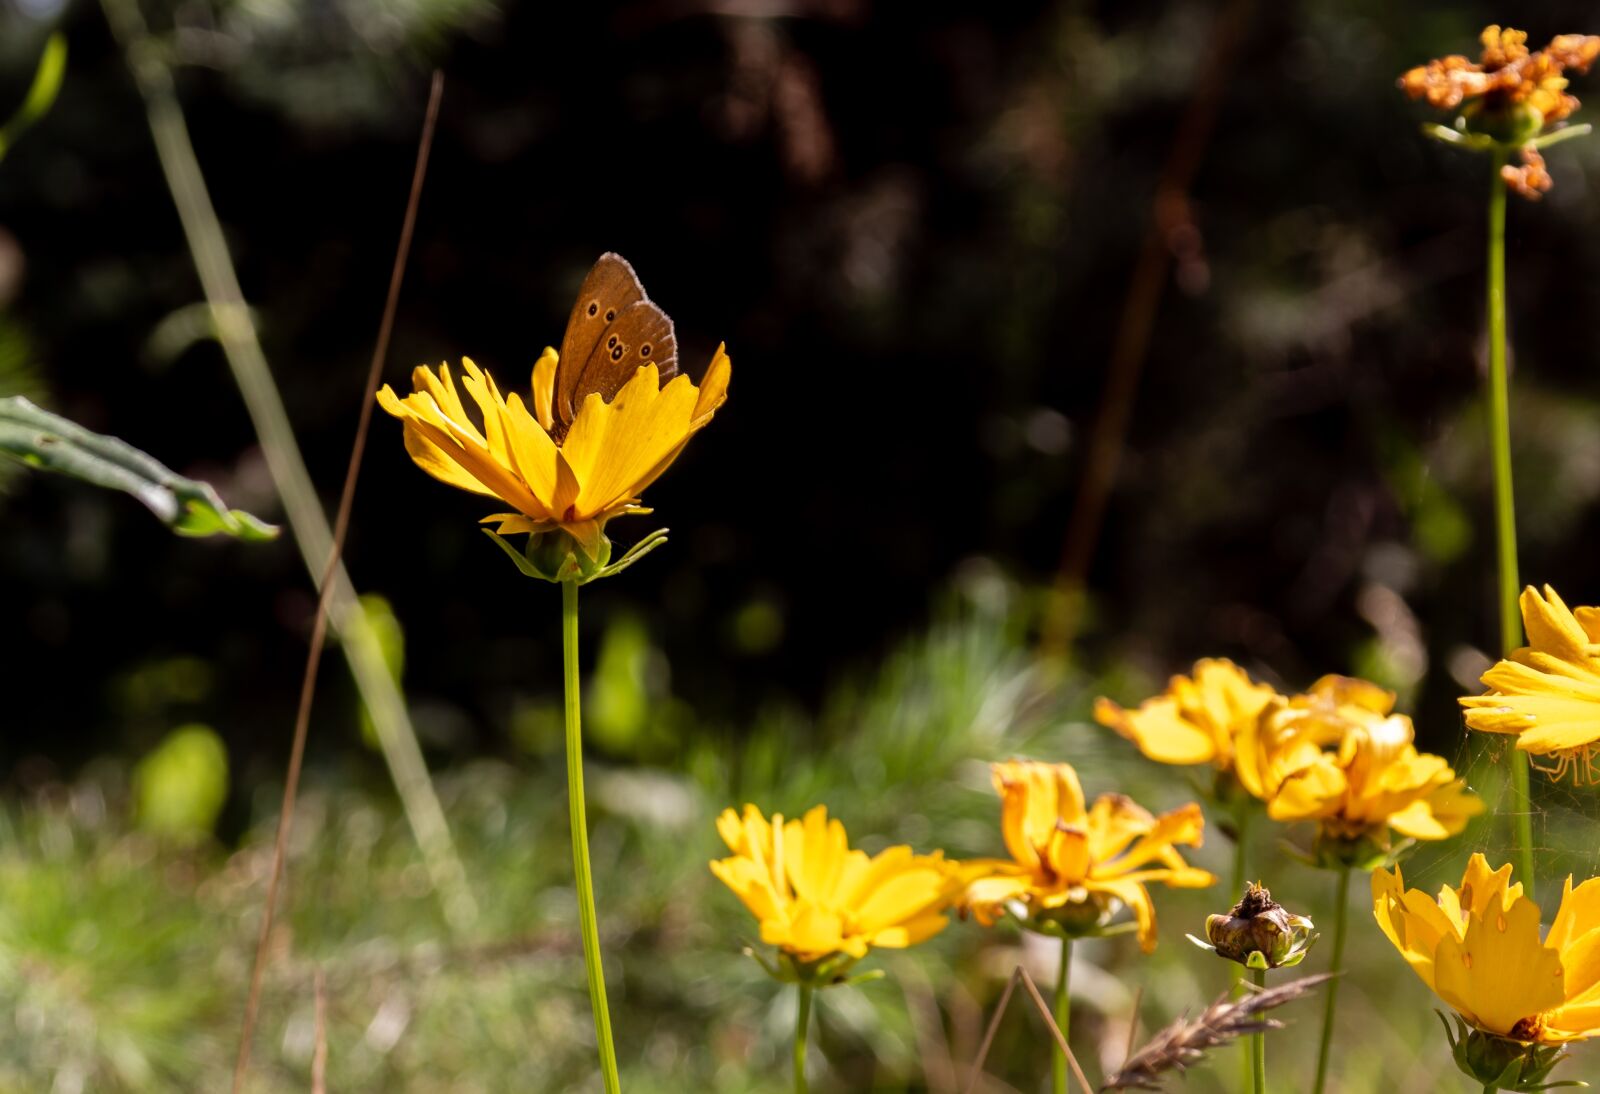 Samsung NX300 sample photo. Butterfly, flower, nature photography